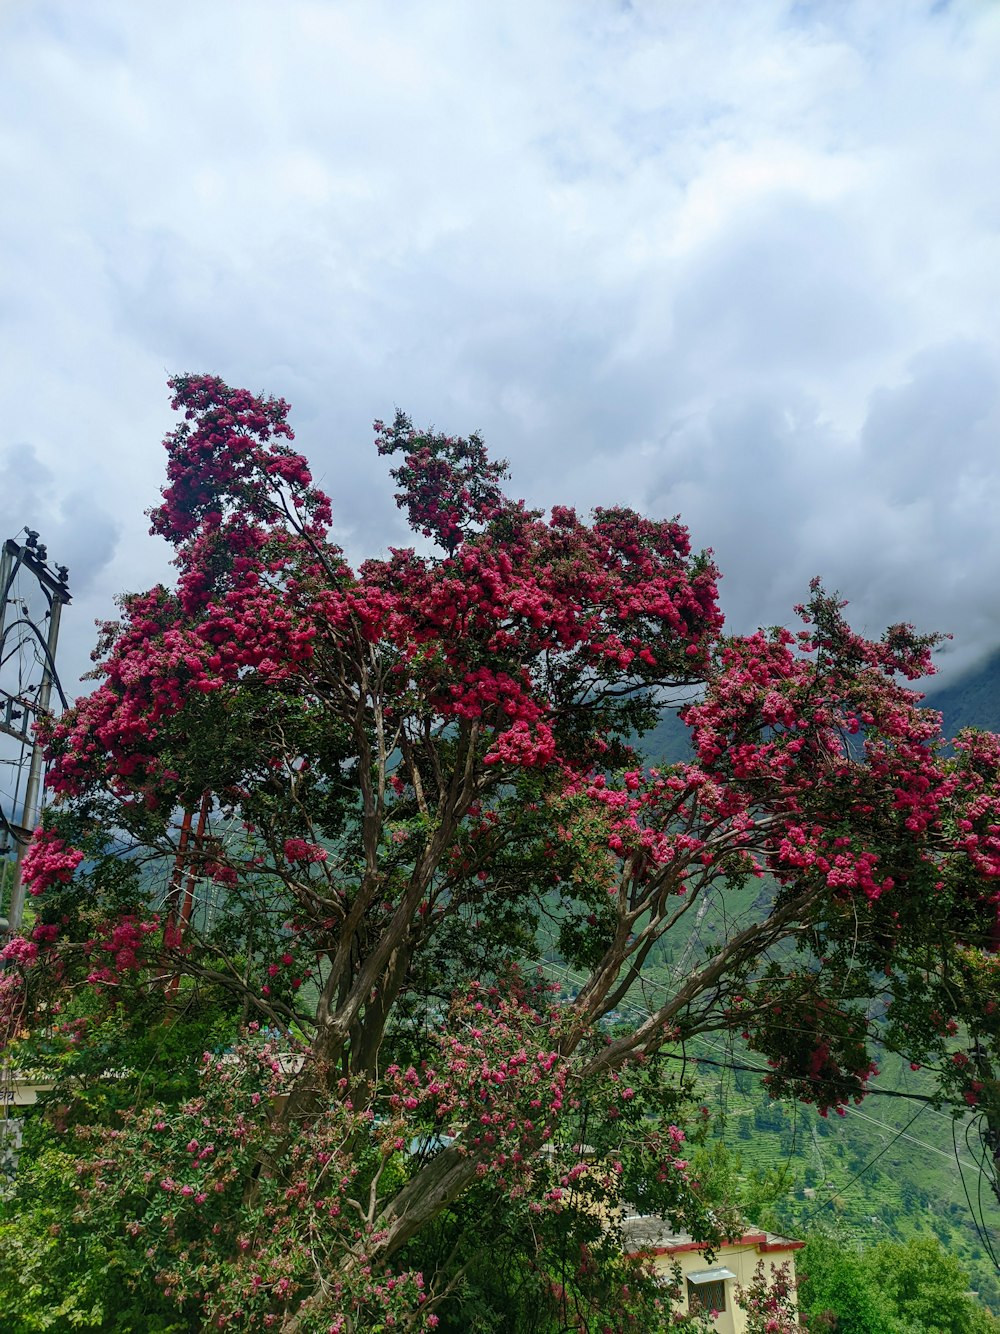 a tree with pink flowers in the foreground and mountains in the background